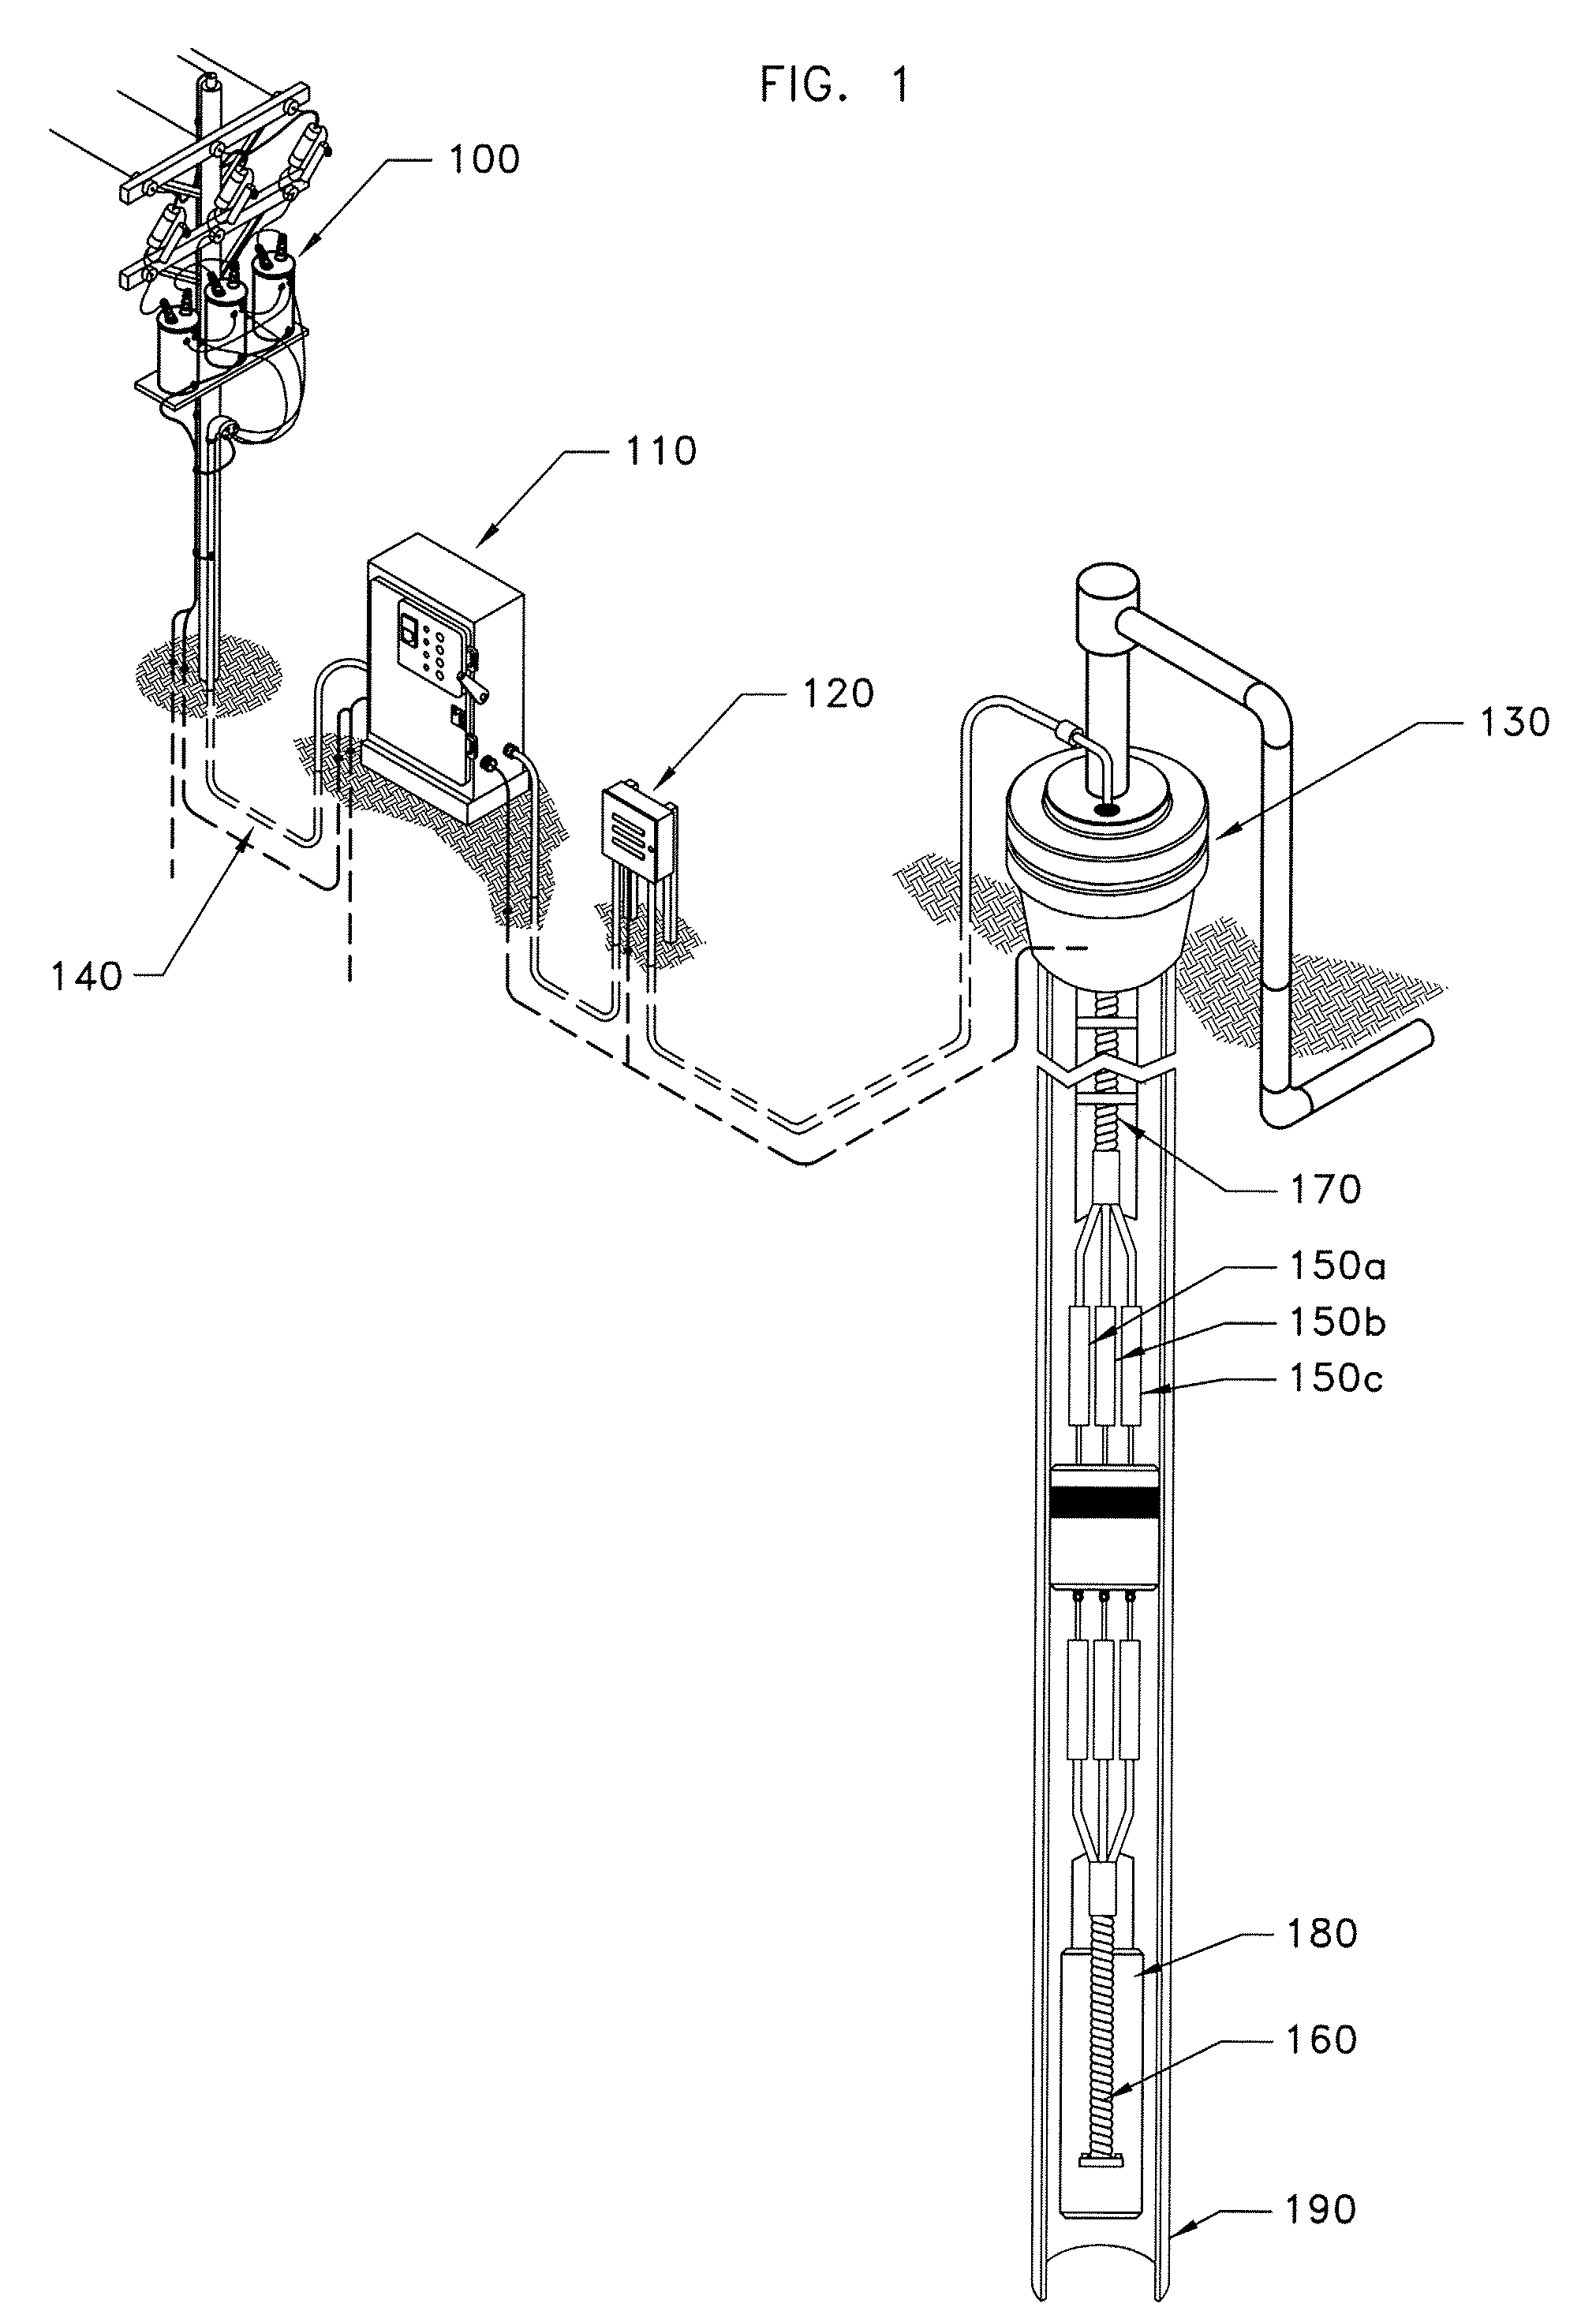 Down hole electrical connector and method for combating rapid decompression